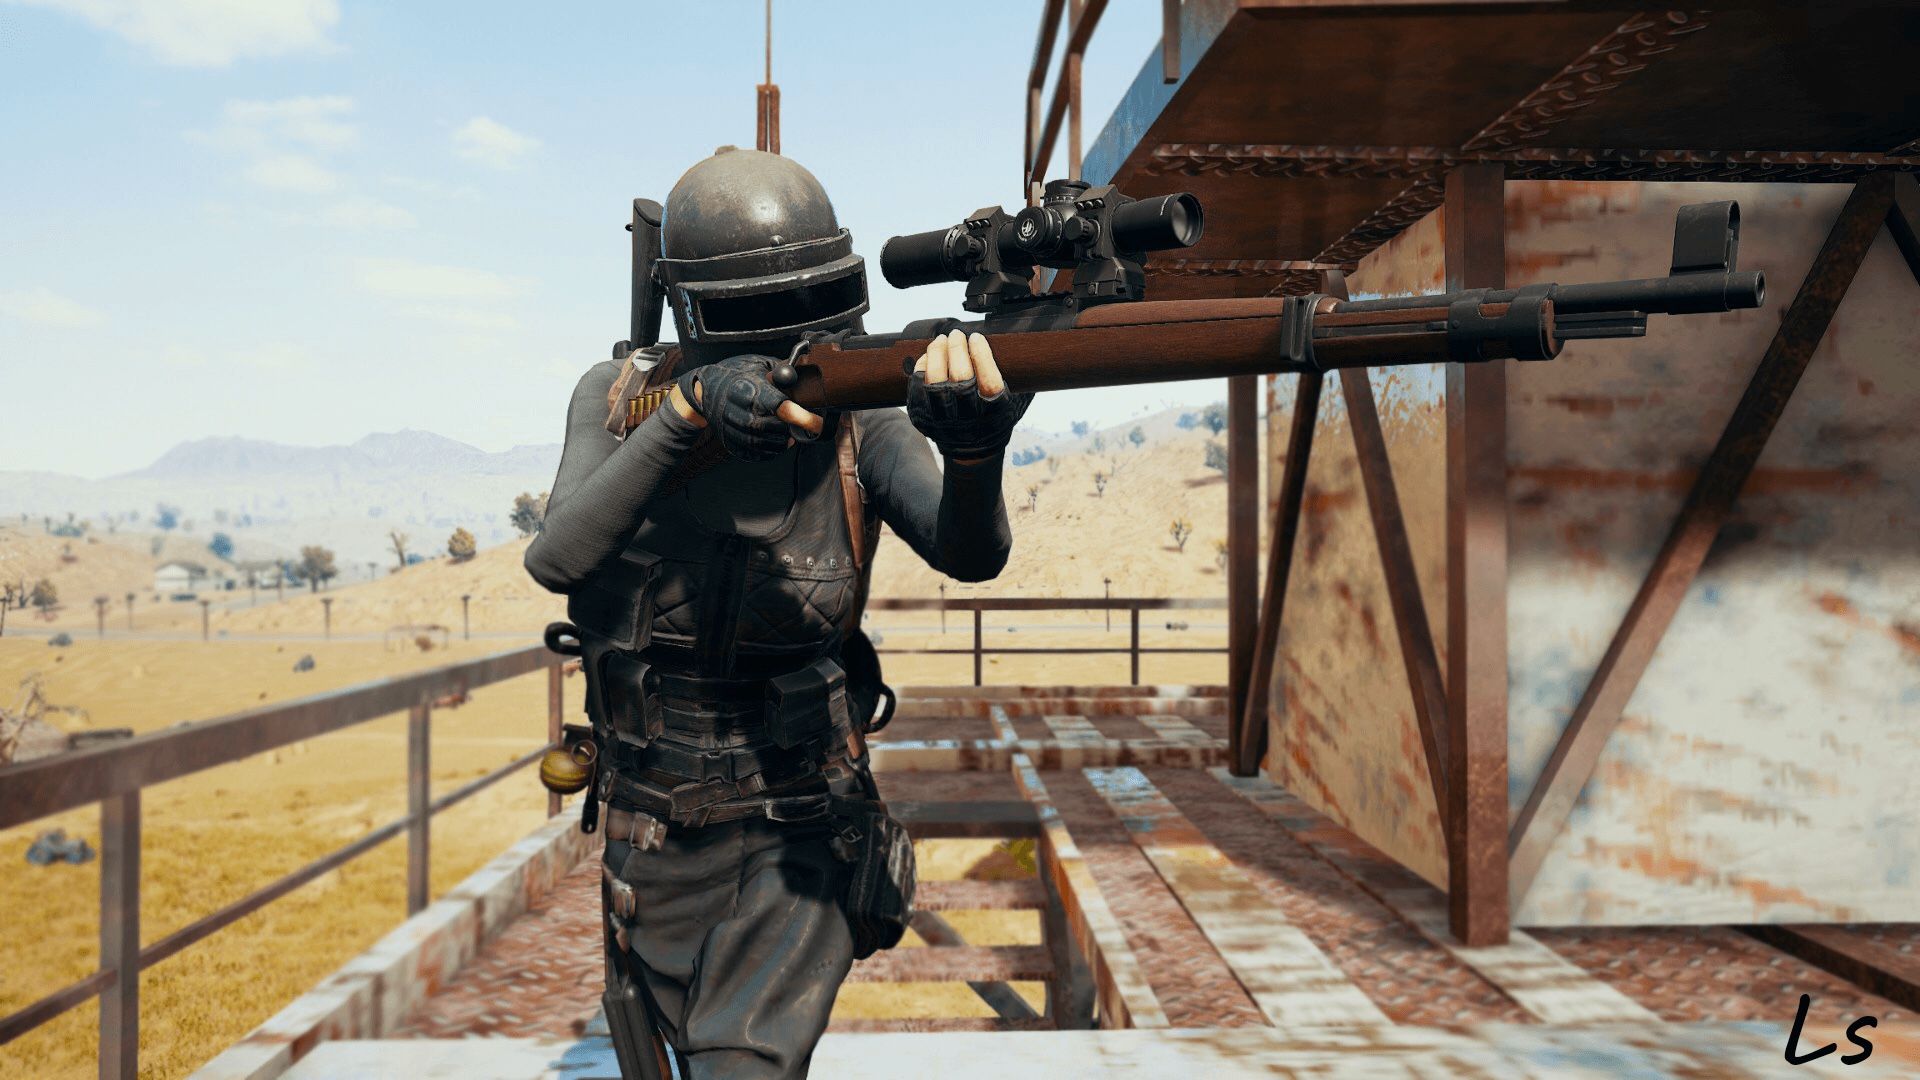 PUBG MOBILE: LONG RANGED LOADOUT AND SNIPER TIPS